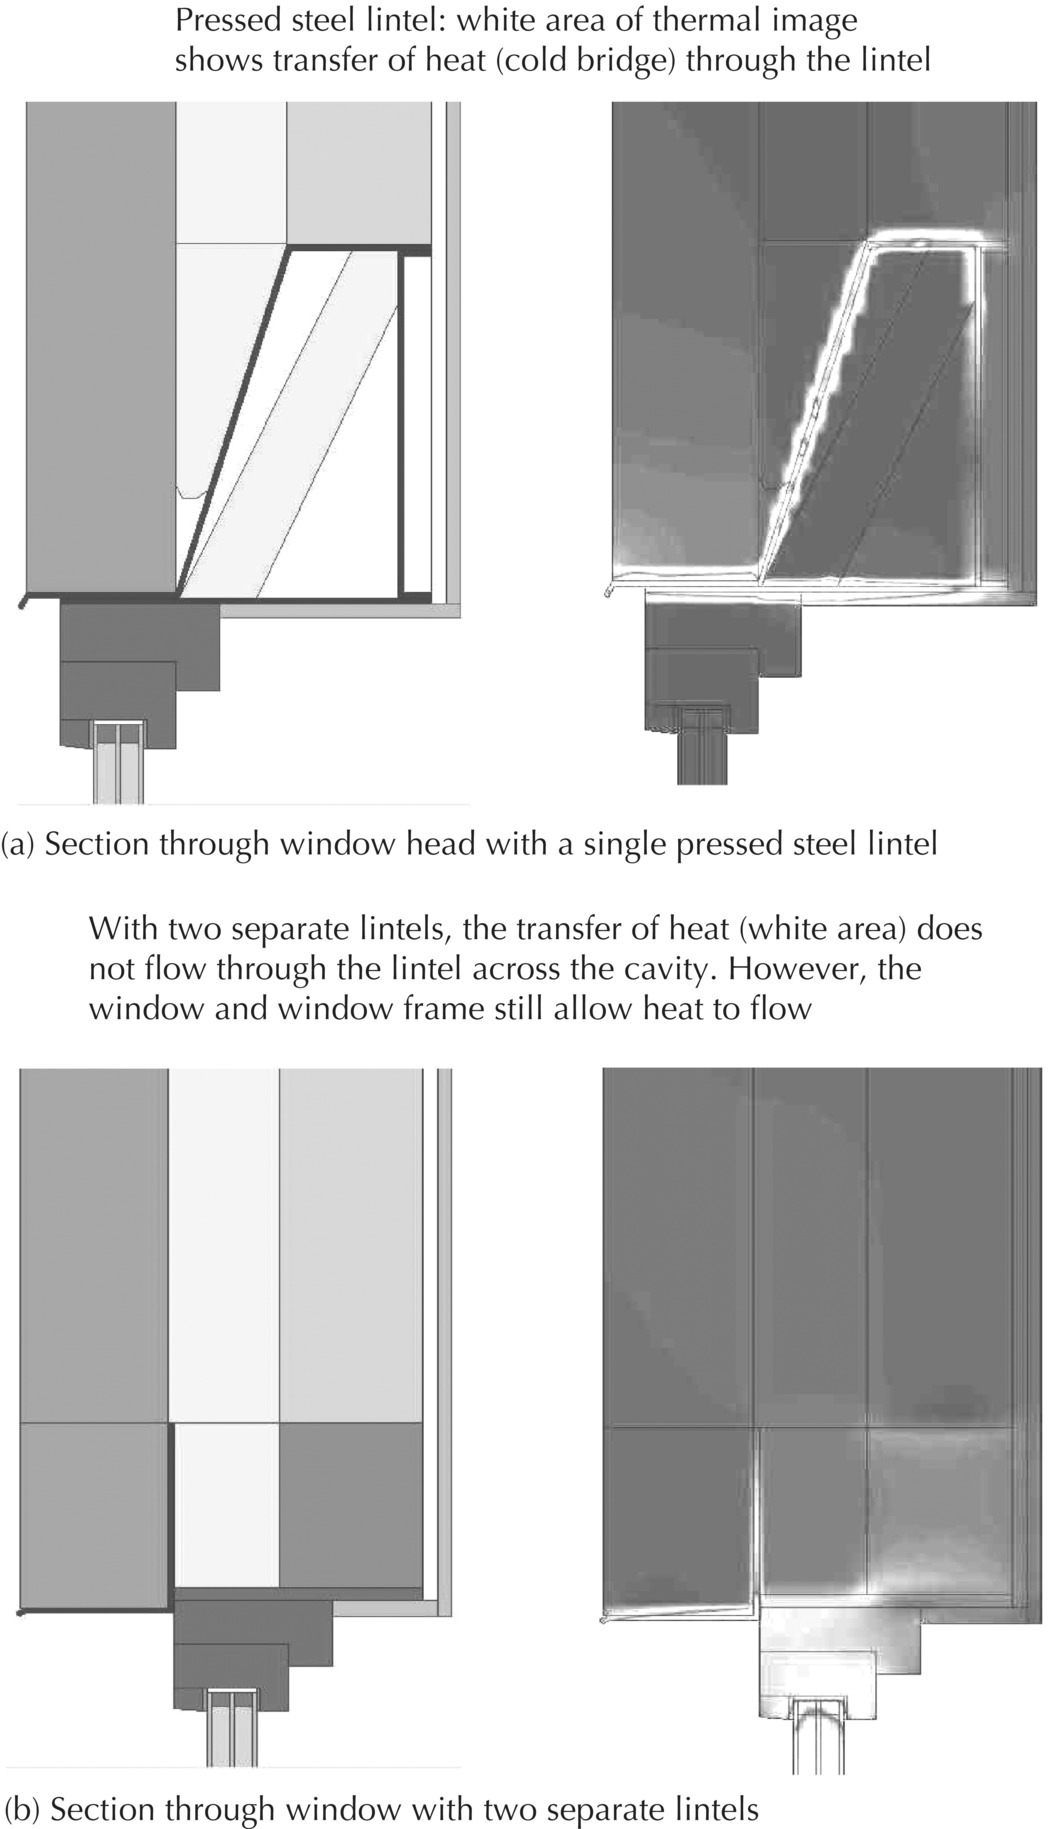 Top: 2 Illustrations displaying section through window head with a single pressed steel lintel. Bottom: 2 Illustrations displaying section through window with 2 separate lintels.